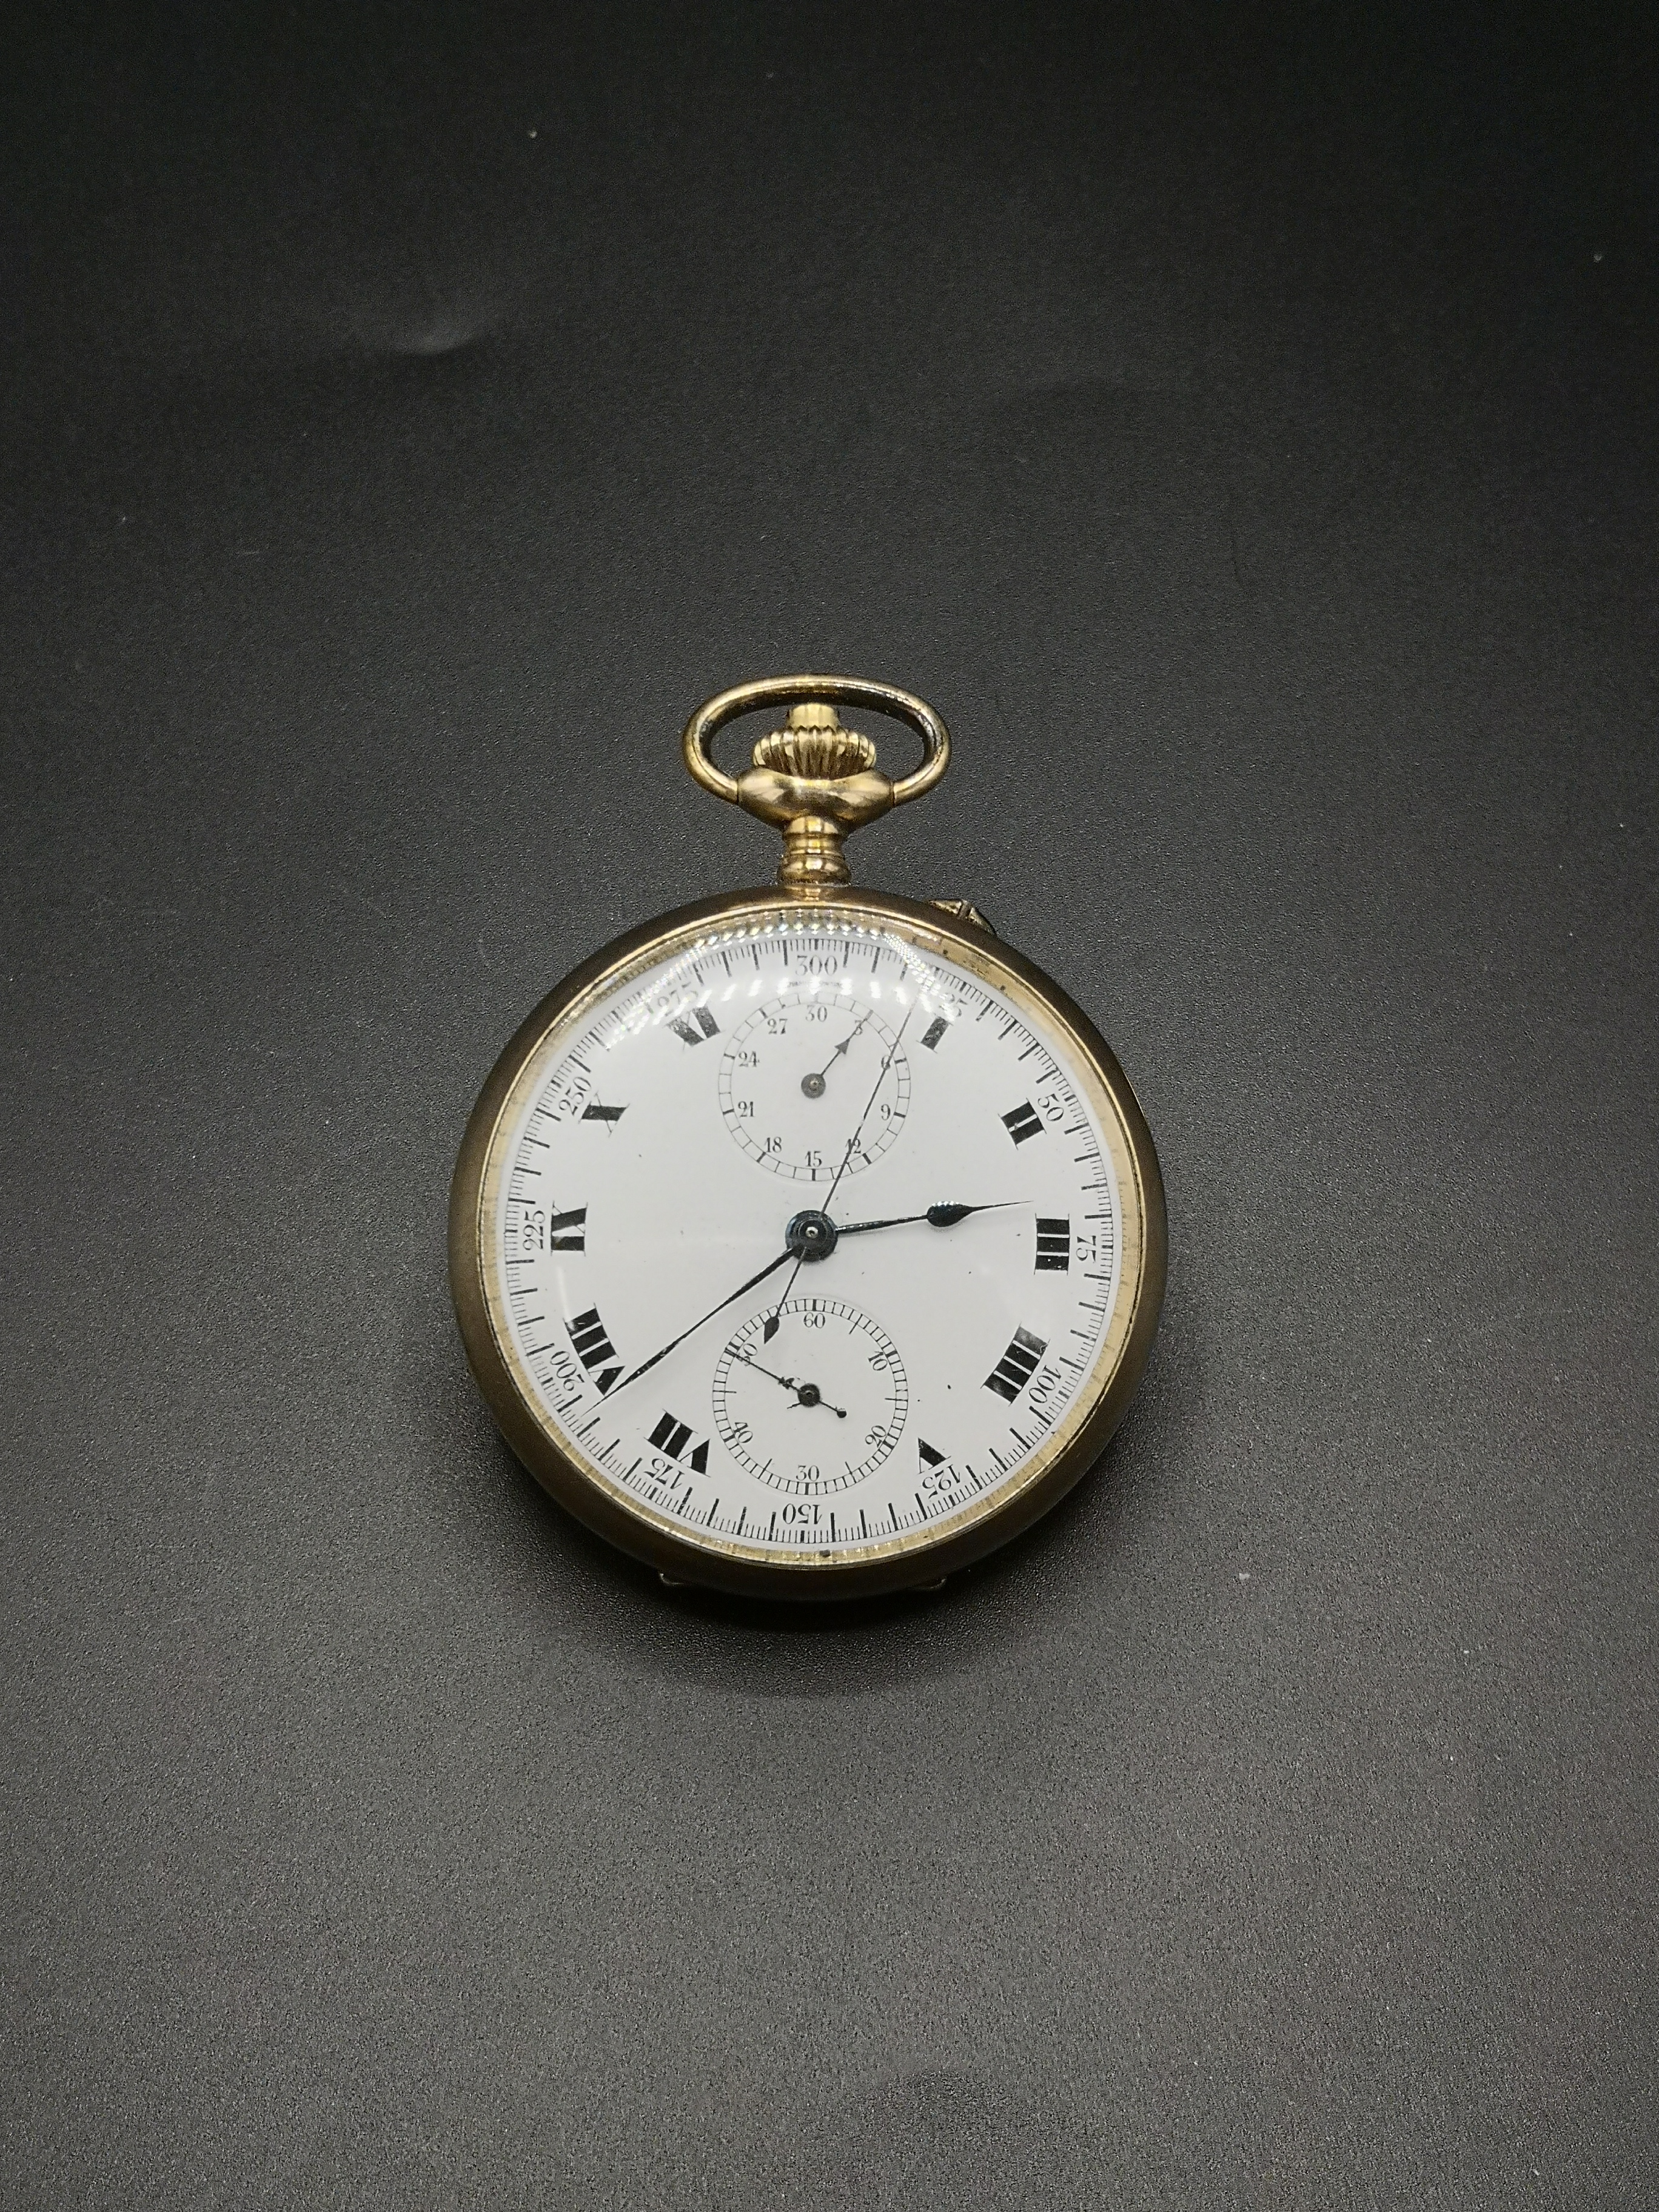 Rolled gold pocket watch - Image 2 of 6